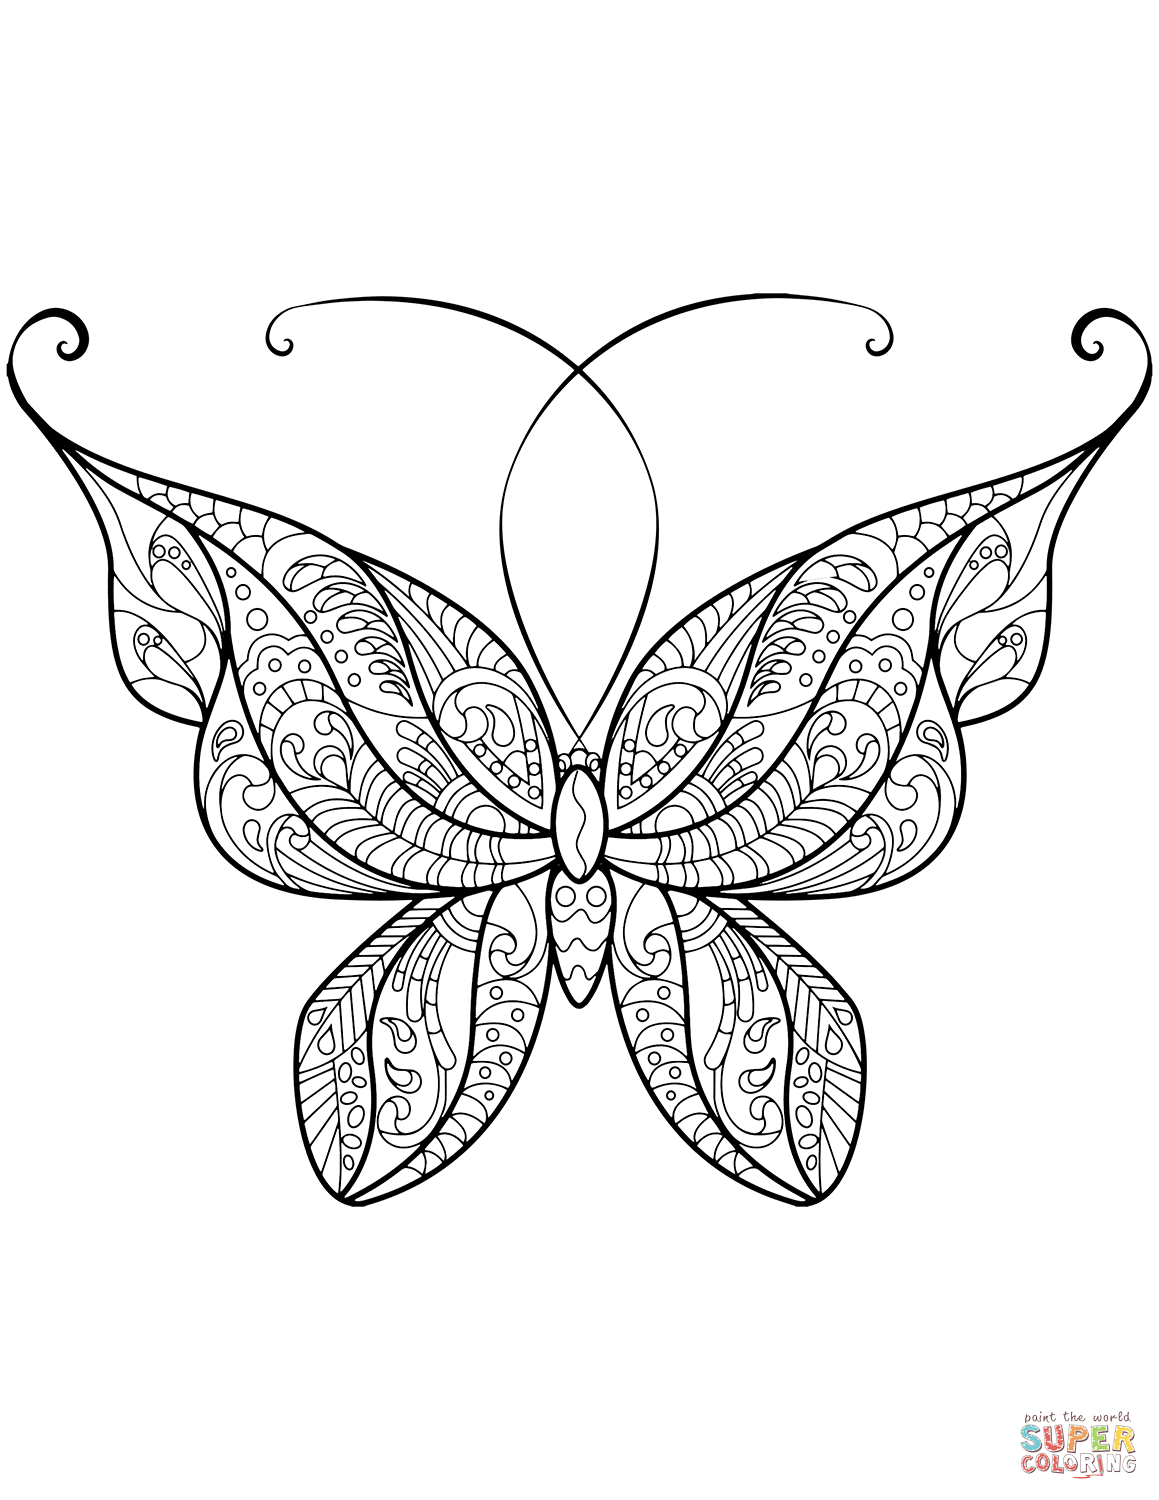 Zentangle Butterfly Coloring Page | Free Printable Coloring Pages - Free Printable Butterfly Coloring Pages